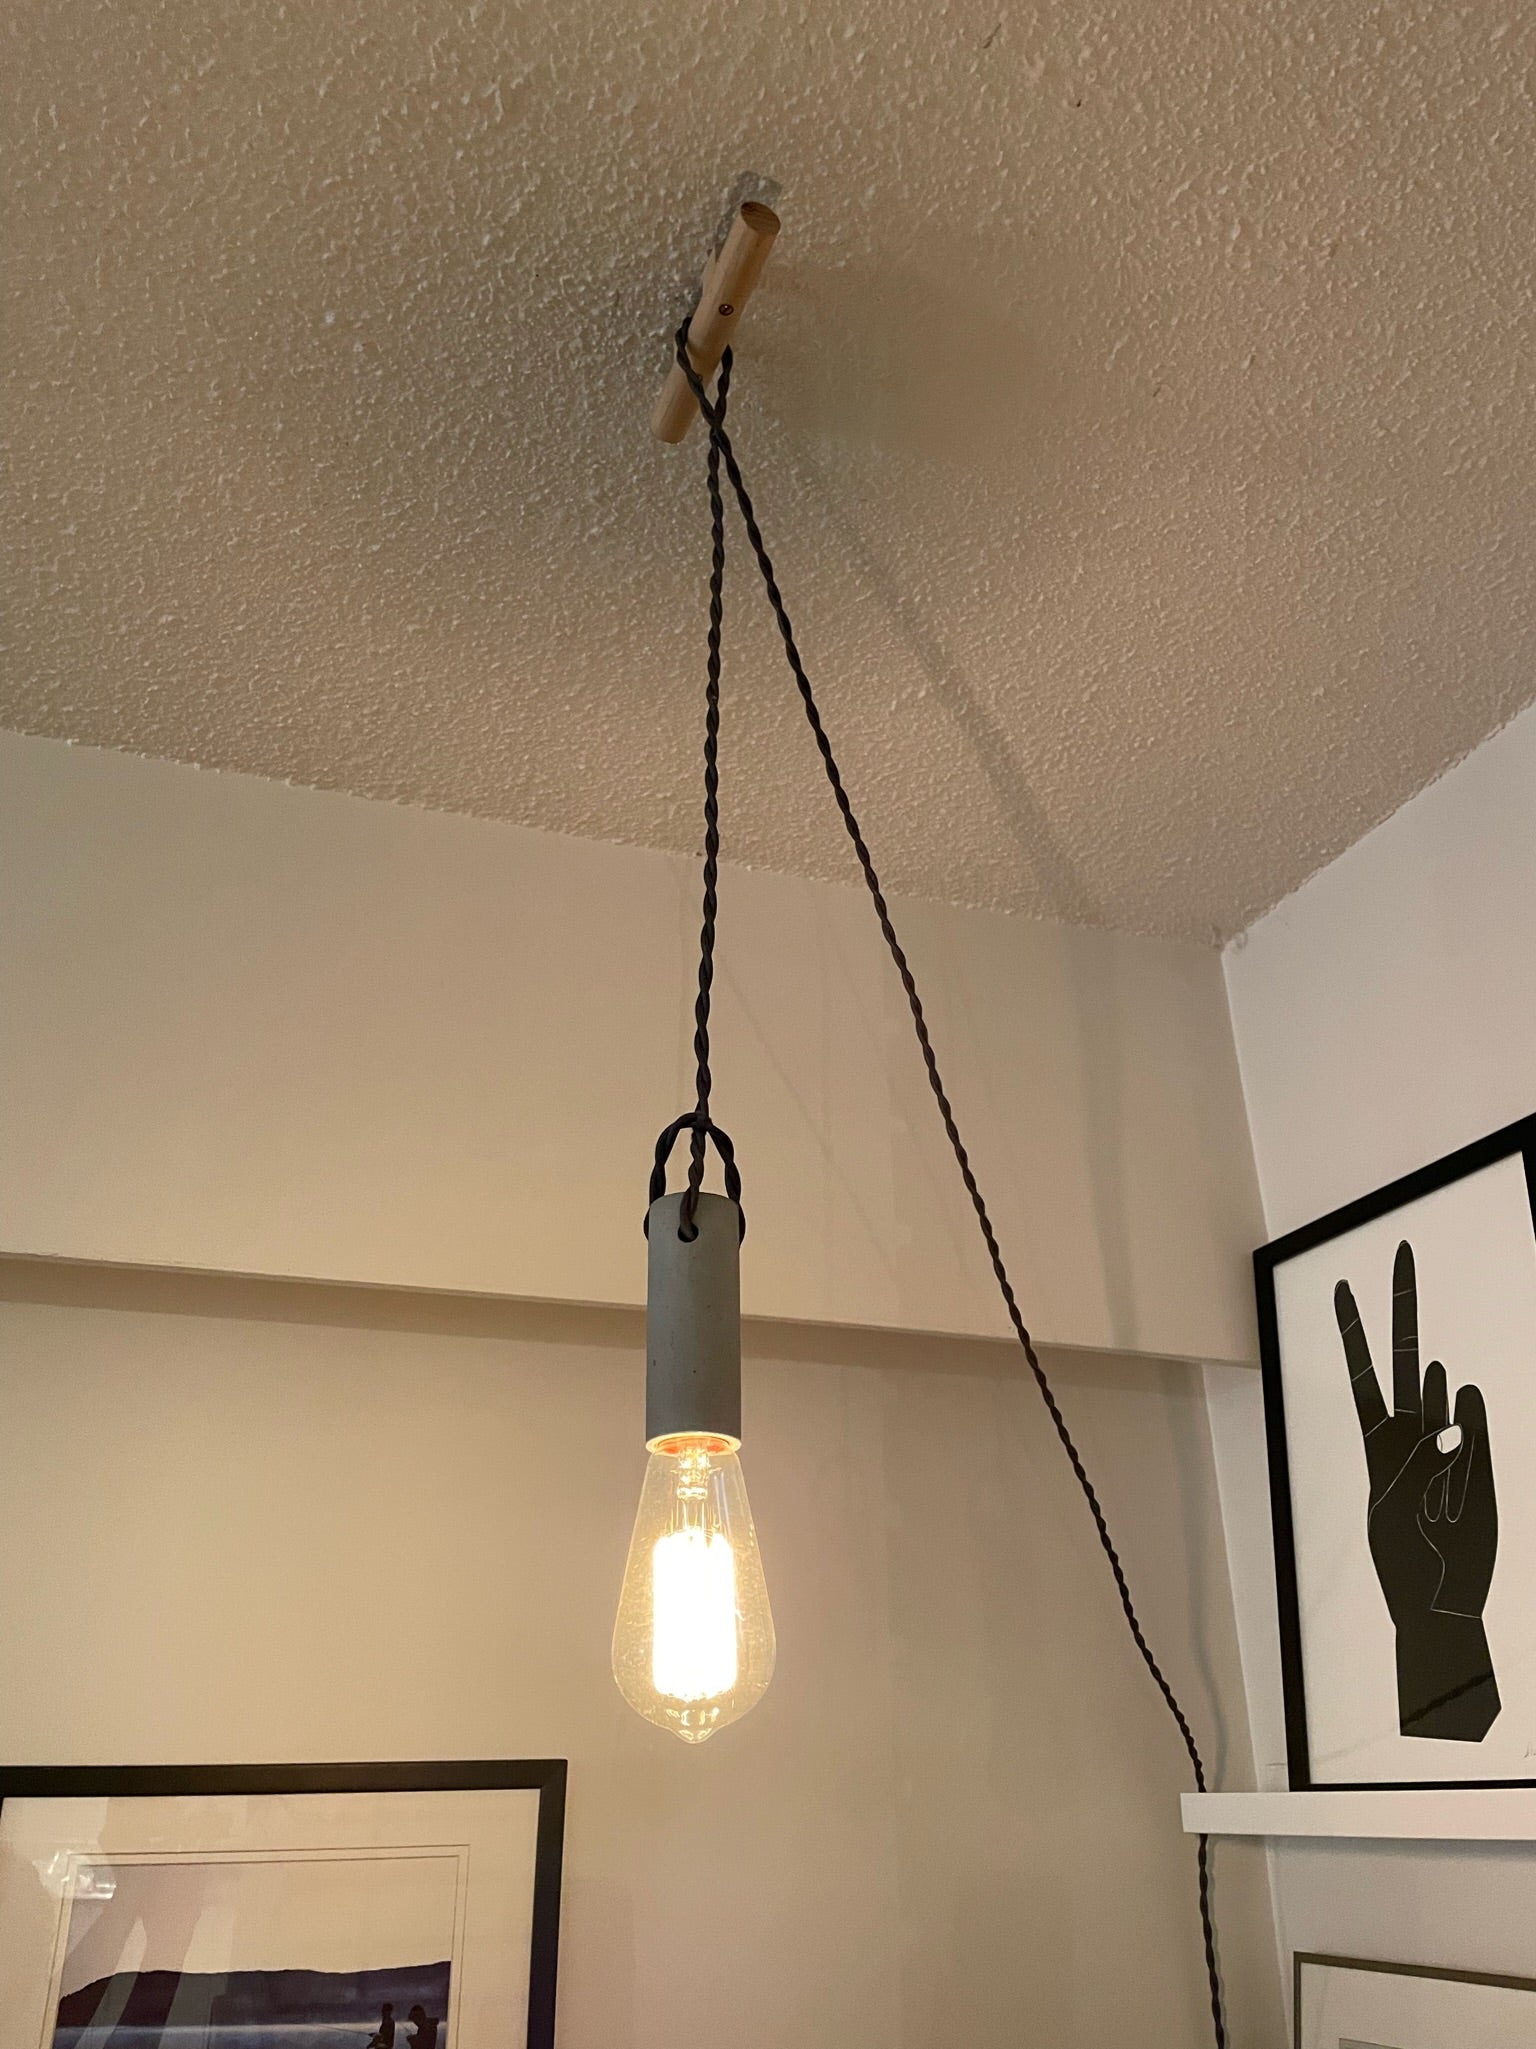 wrk-shp Concrete Pendant Light With Wood Wall Cleat